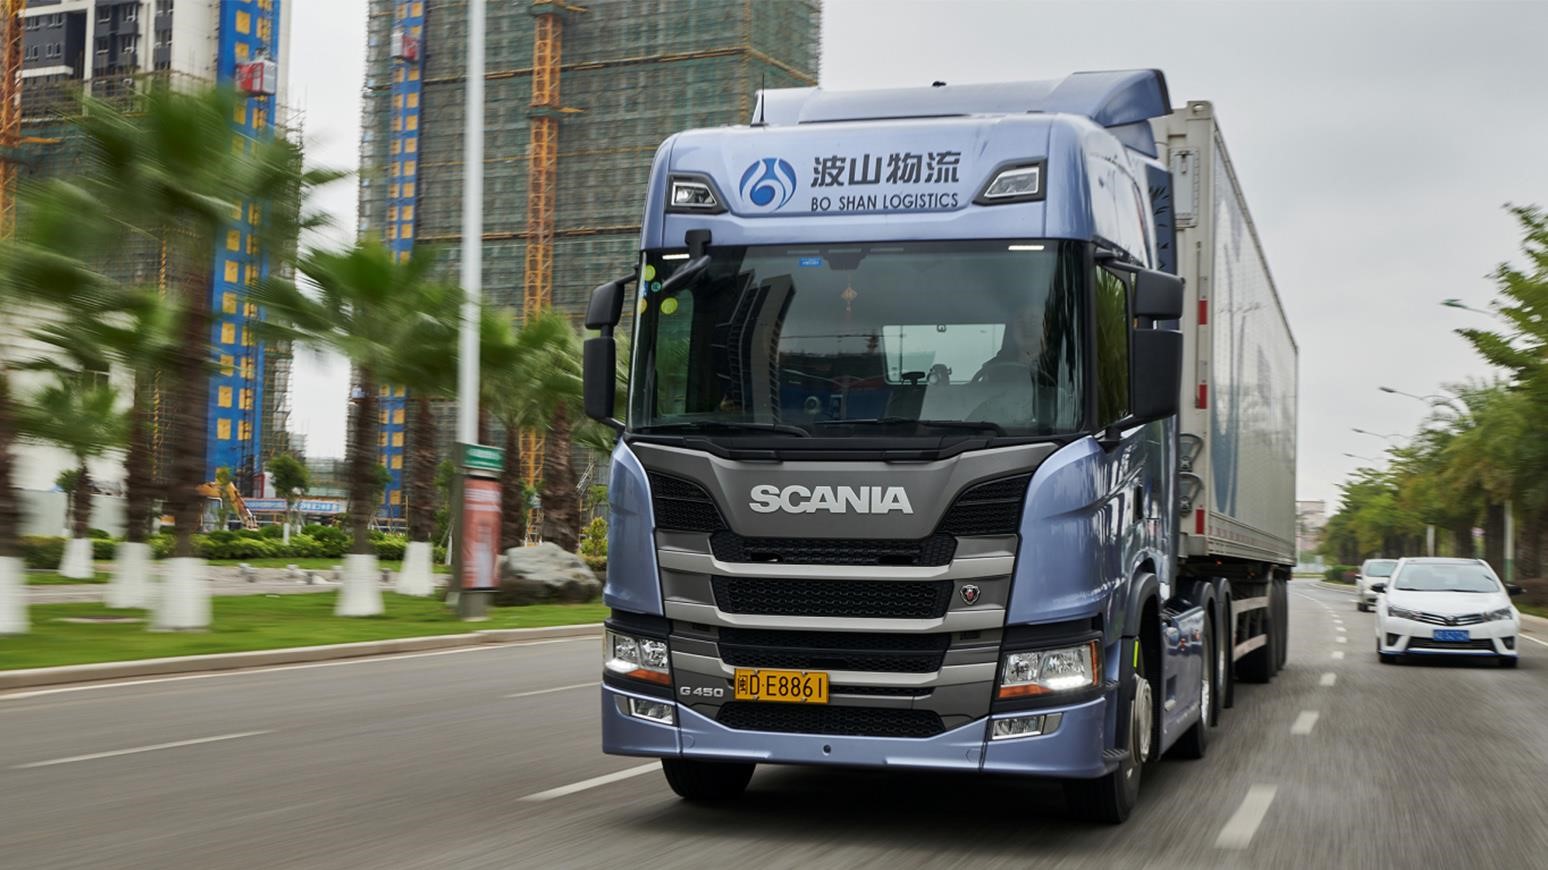 Chinese Company Relies On Scania Trucks For On-Time Delivery Of Perishable Goods